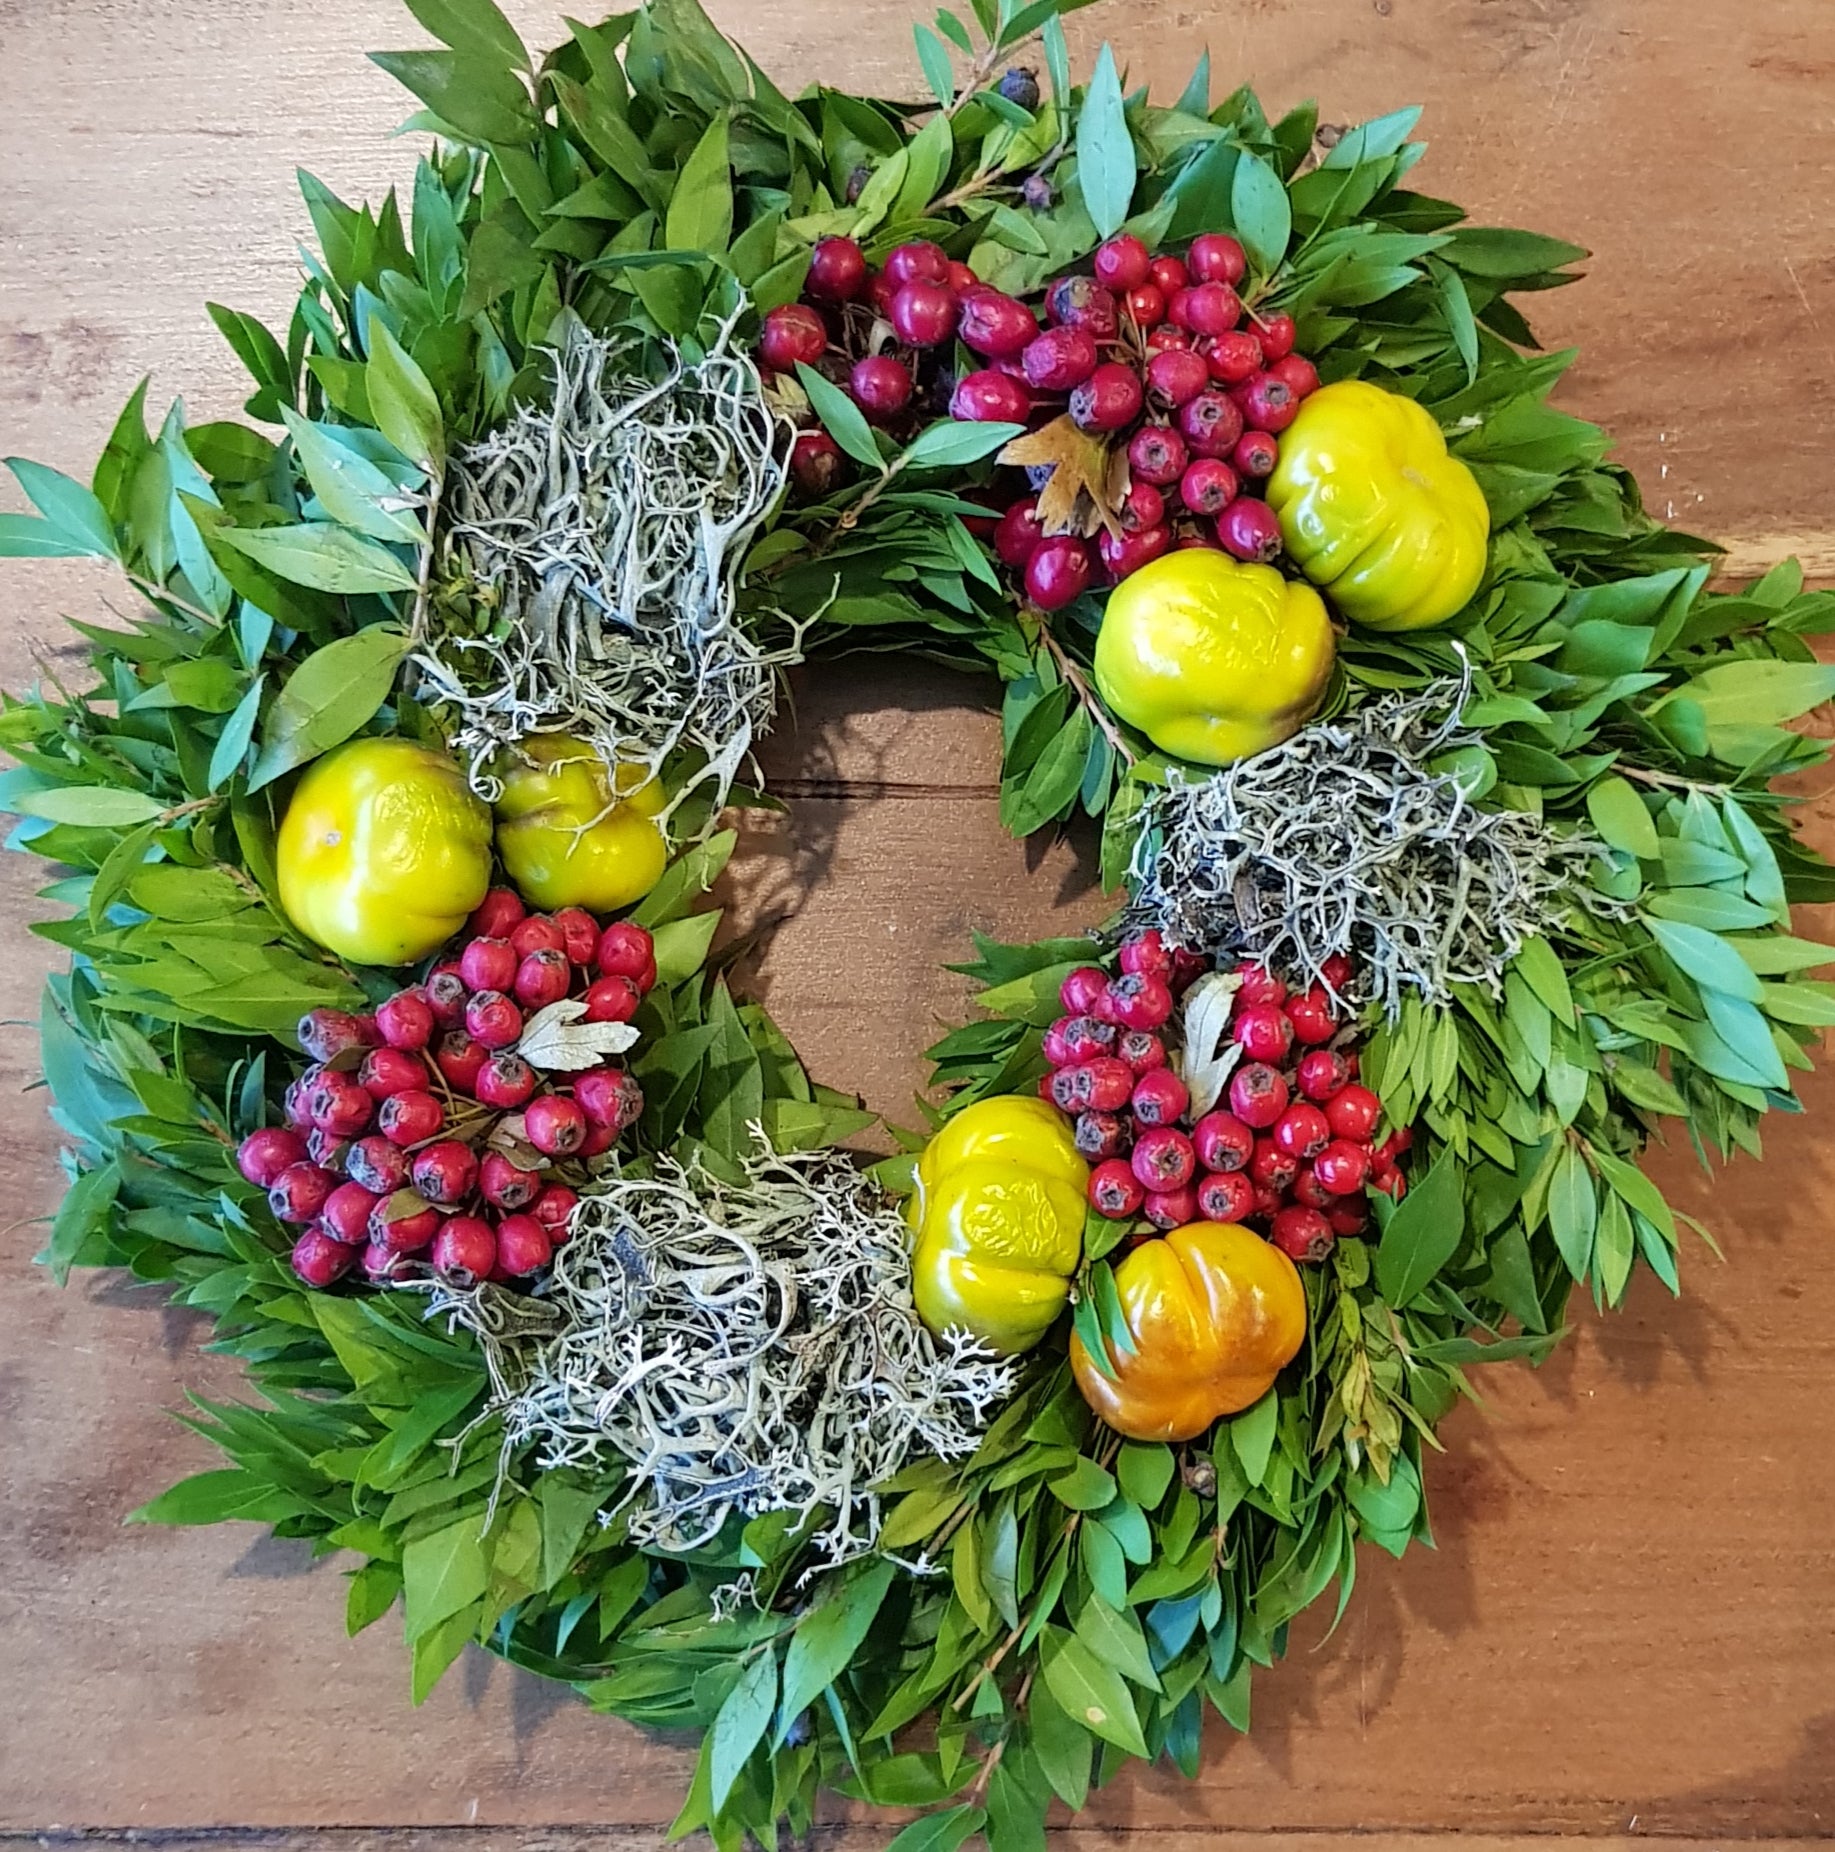 Turkish Wreath - Berries, Fruits and Foliage - 26cm (10")